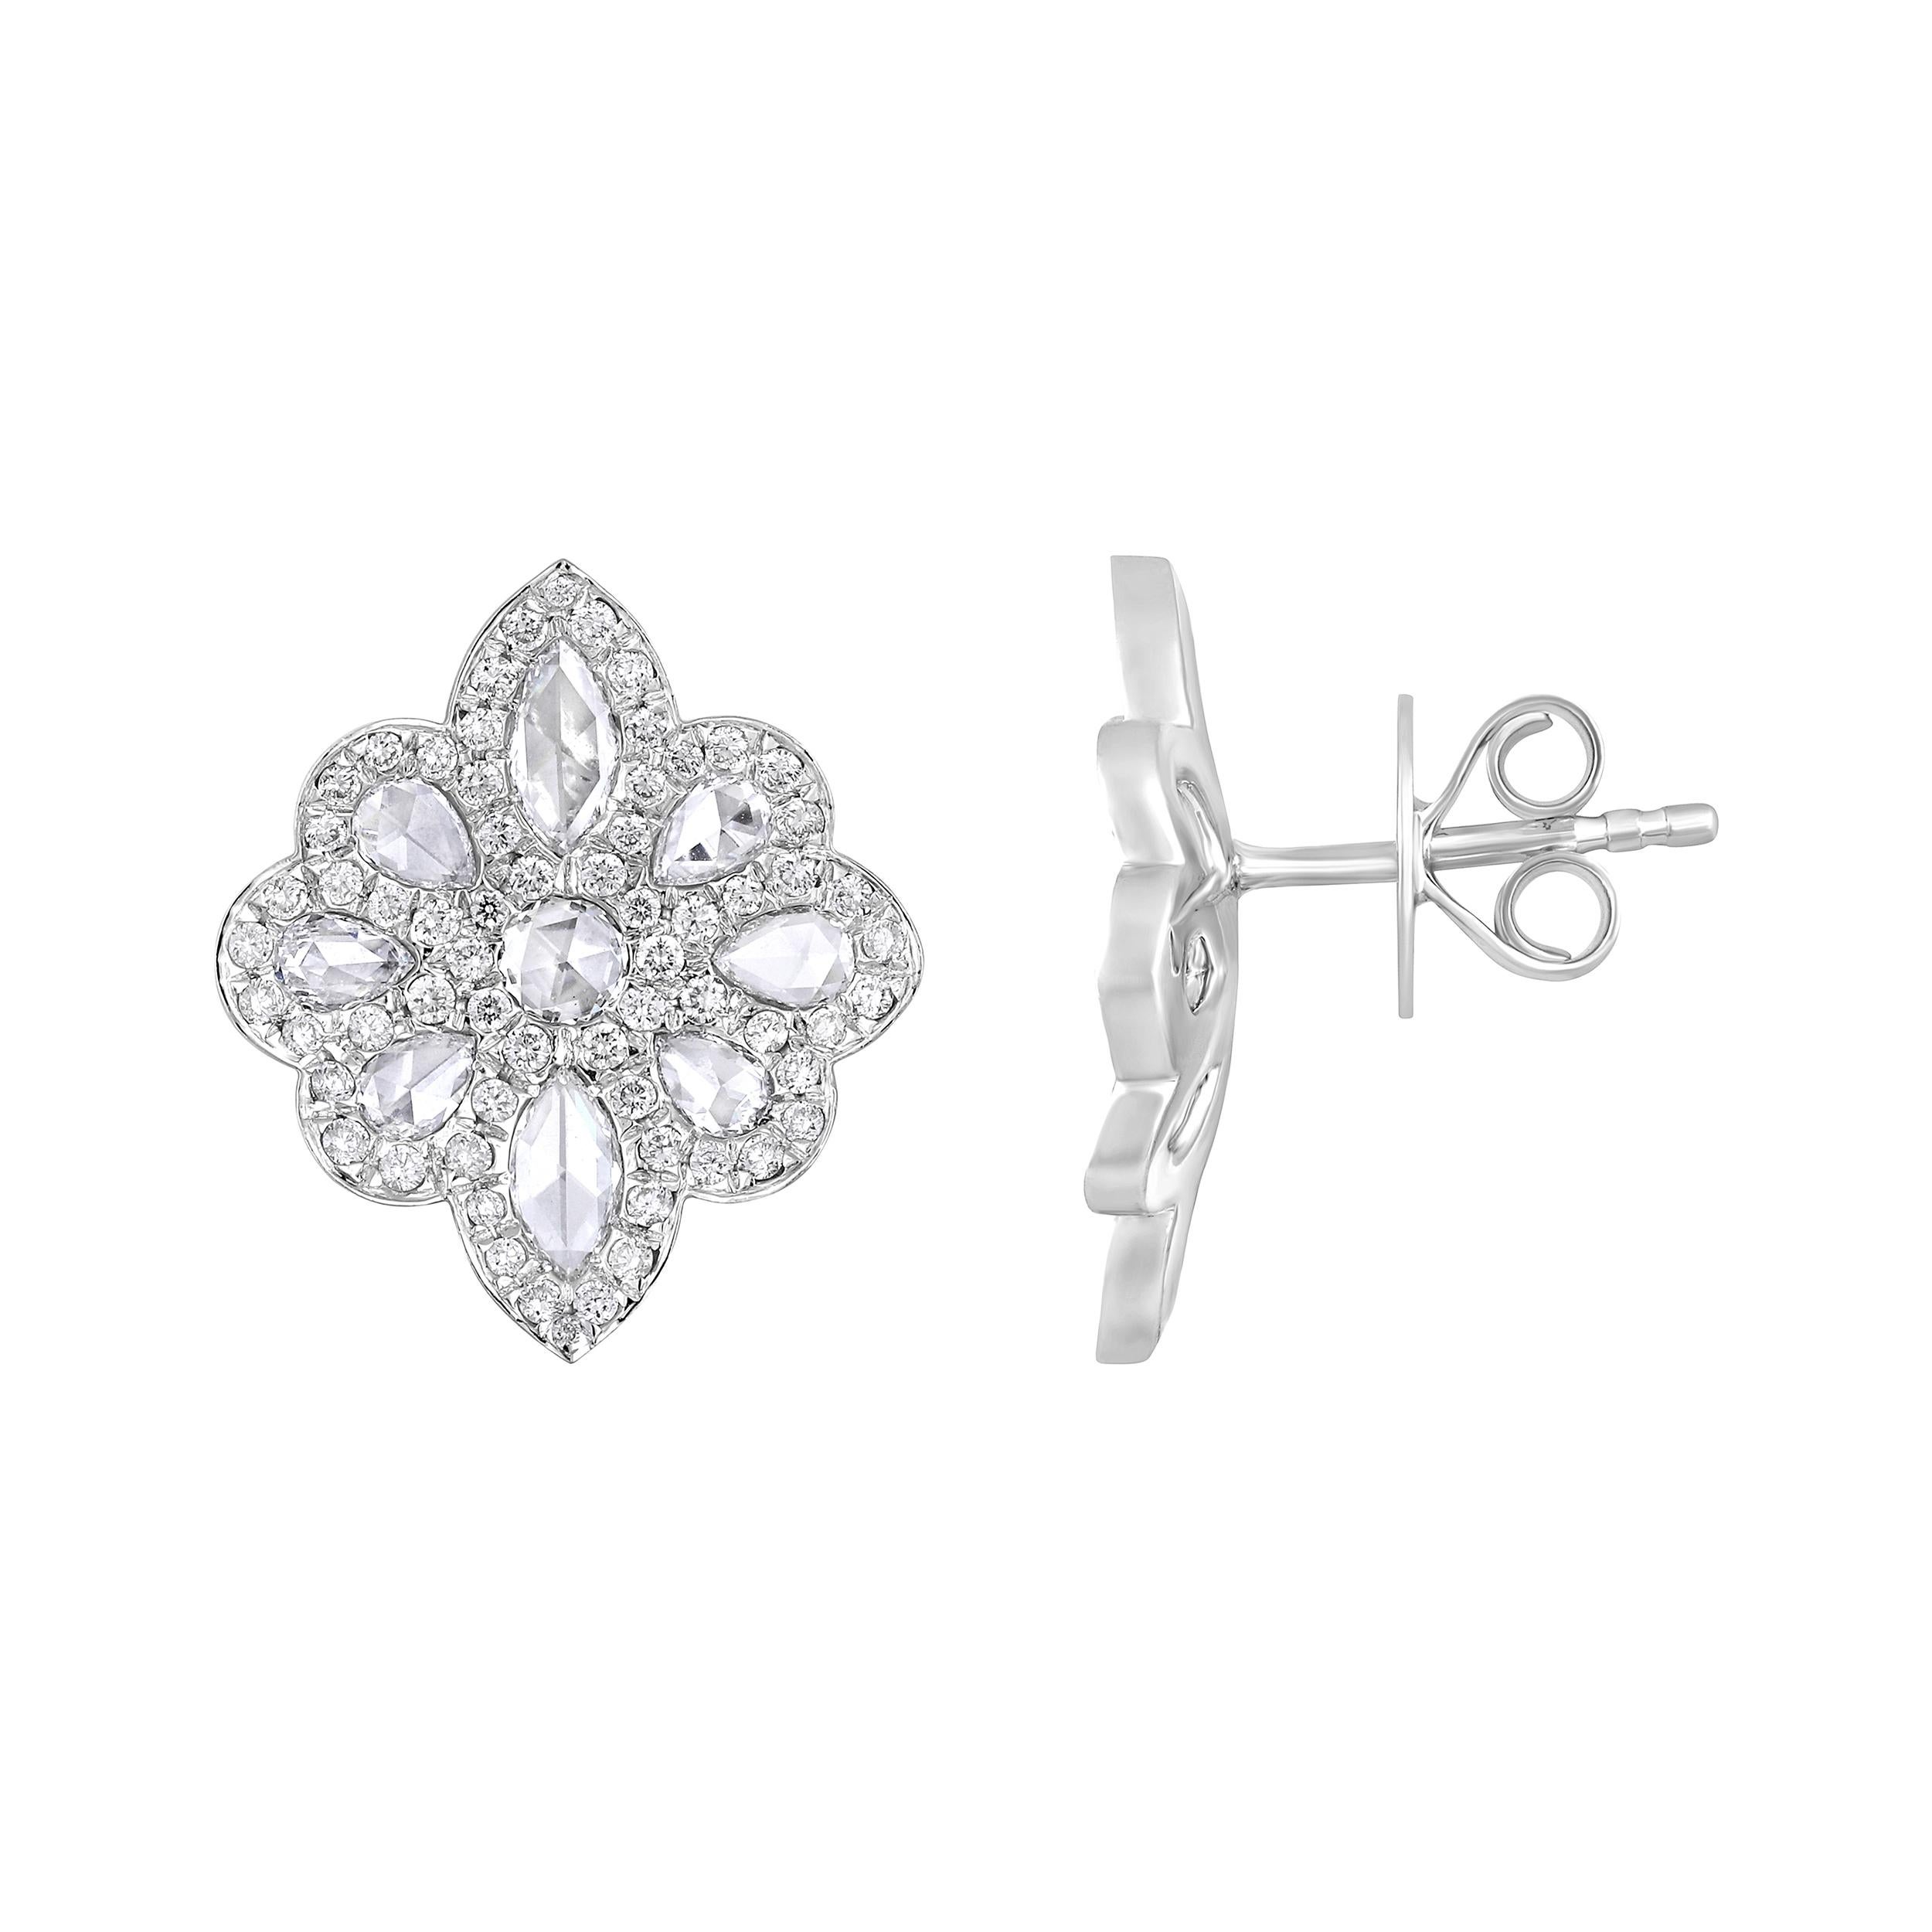 Crafted in 5.893 grams of 18K White Gold, the earrings contain 18 stones of Rose Cut Natural Diamonds with a total of 0.97 carat in E-F color and VVS-VS clarity combined with 126 stones of Round Natural Diamonds with a total of 0.53 carat in E-F